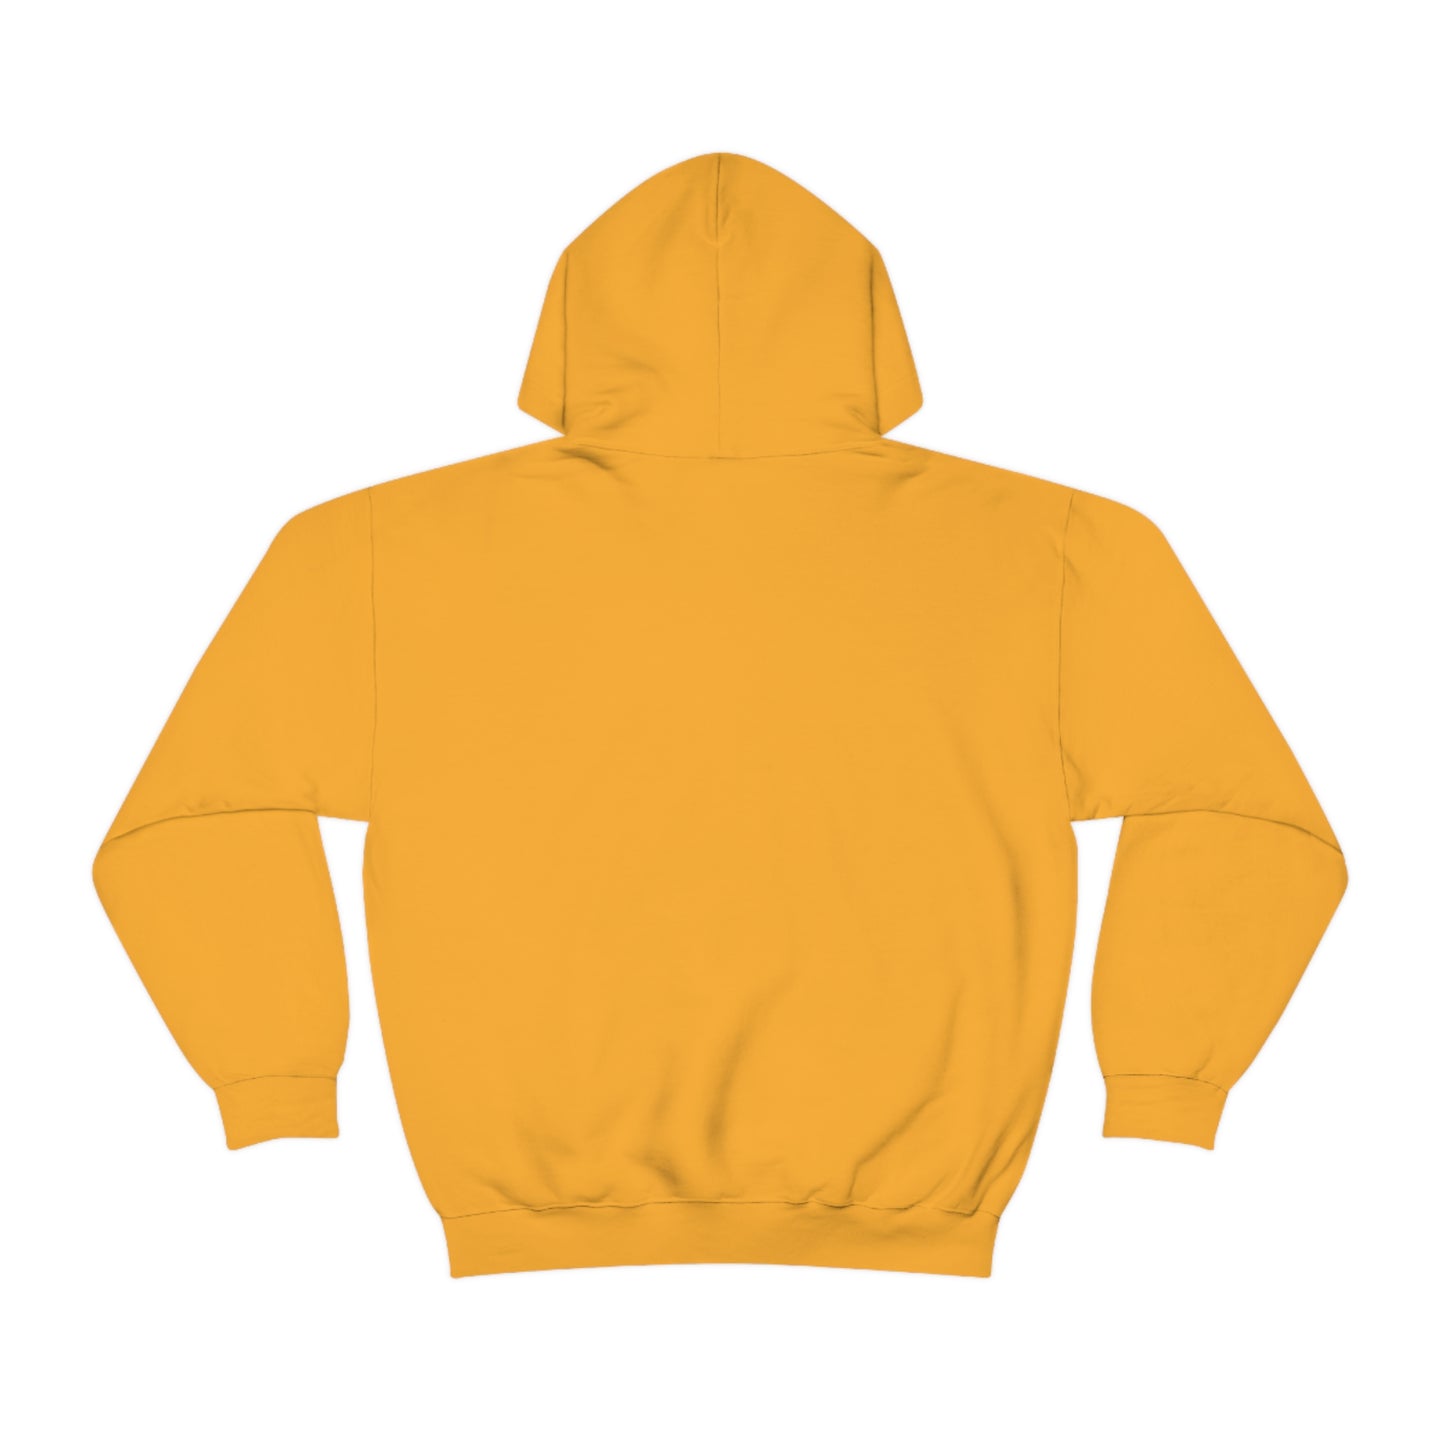 Country Evolution Hoodie